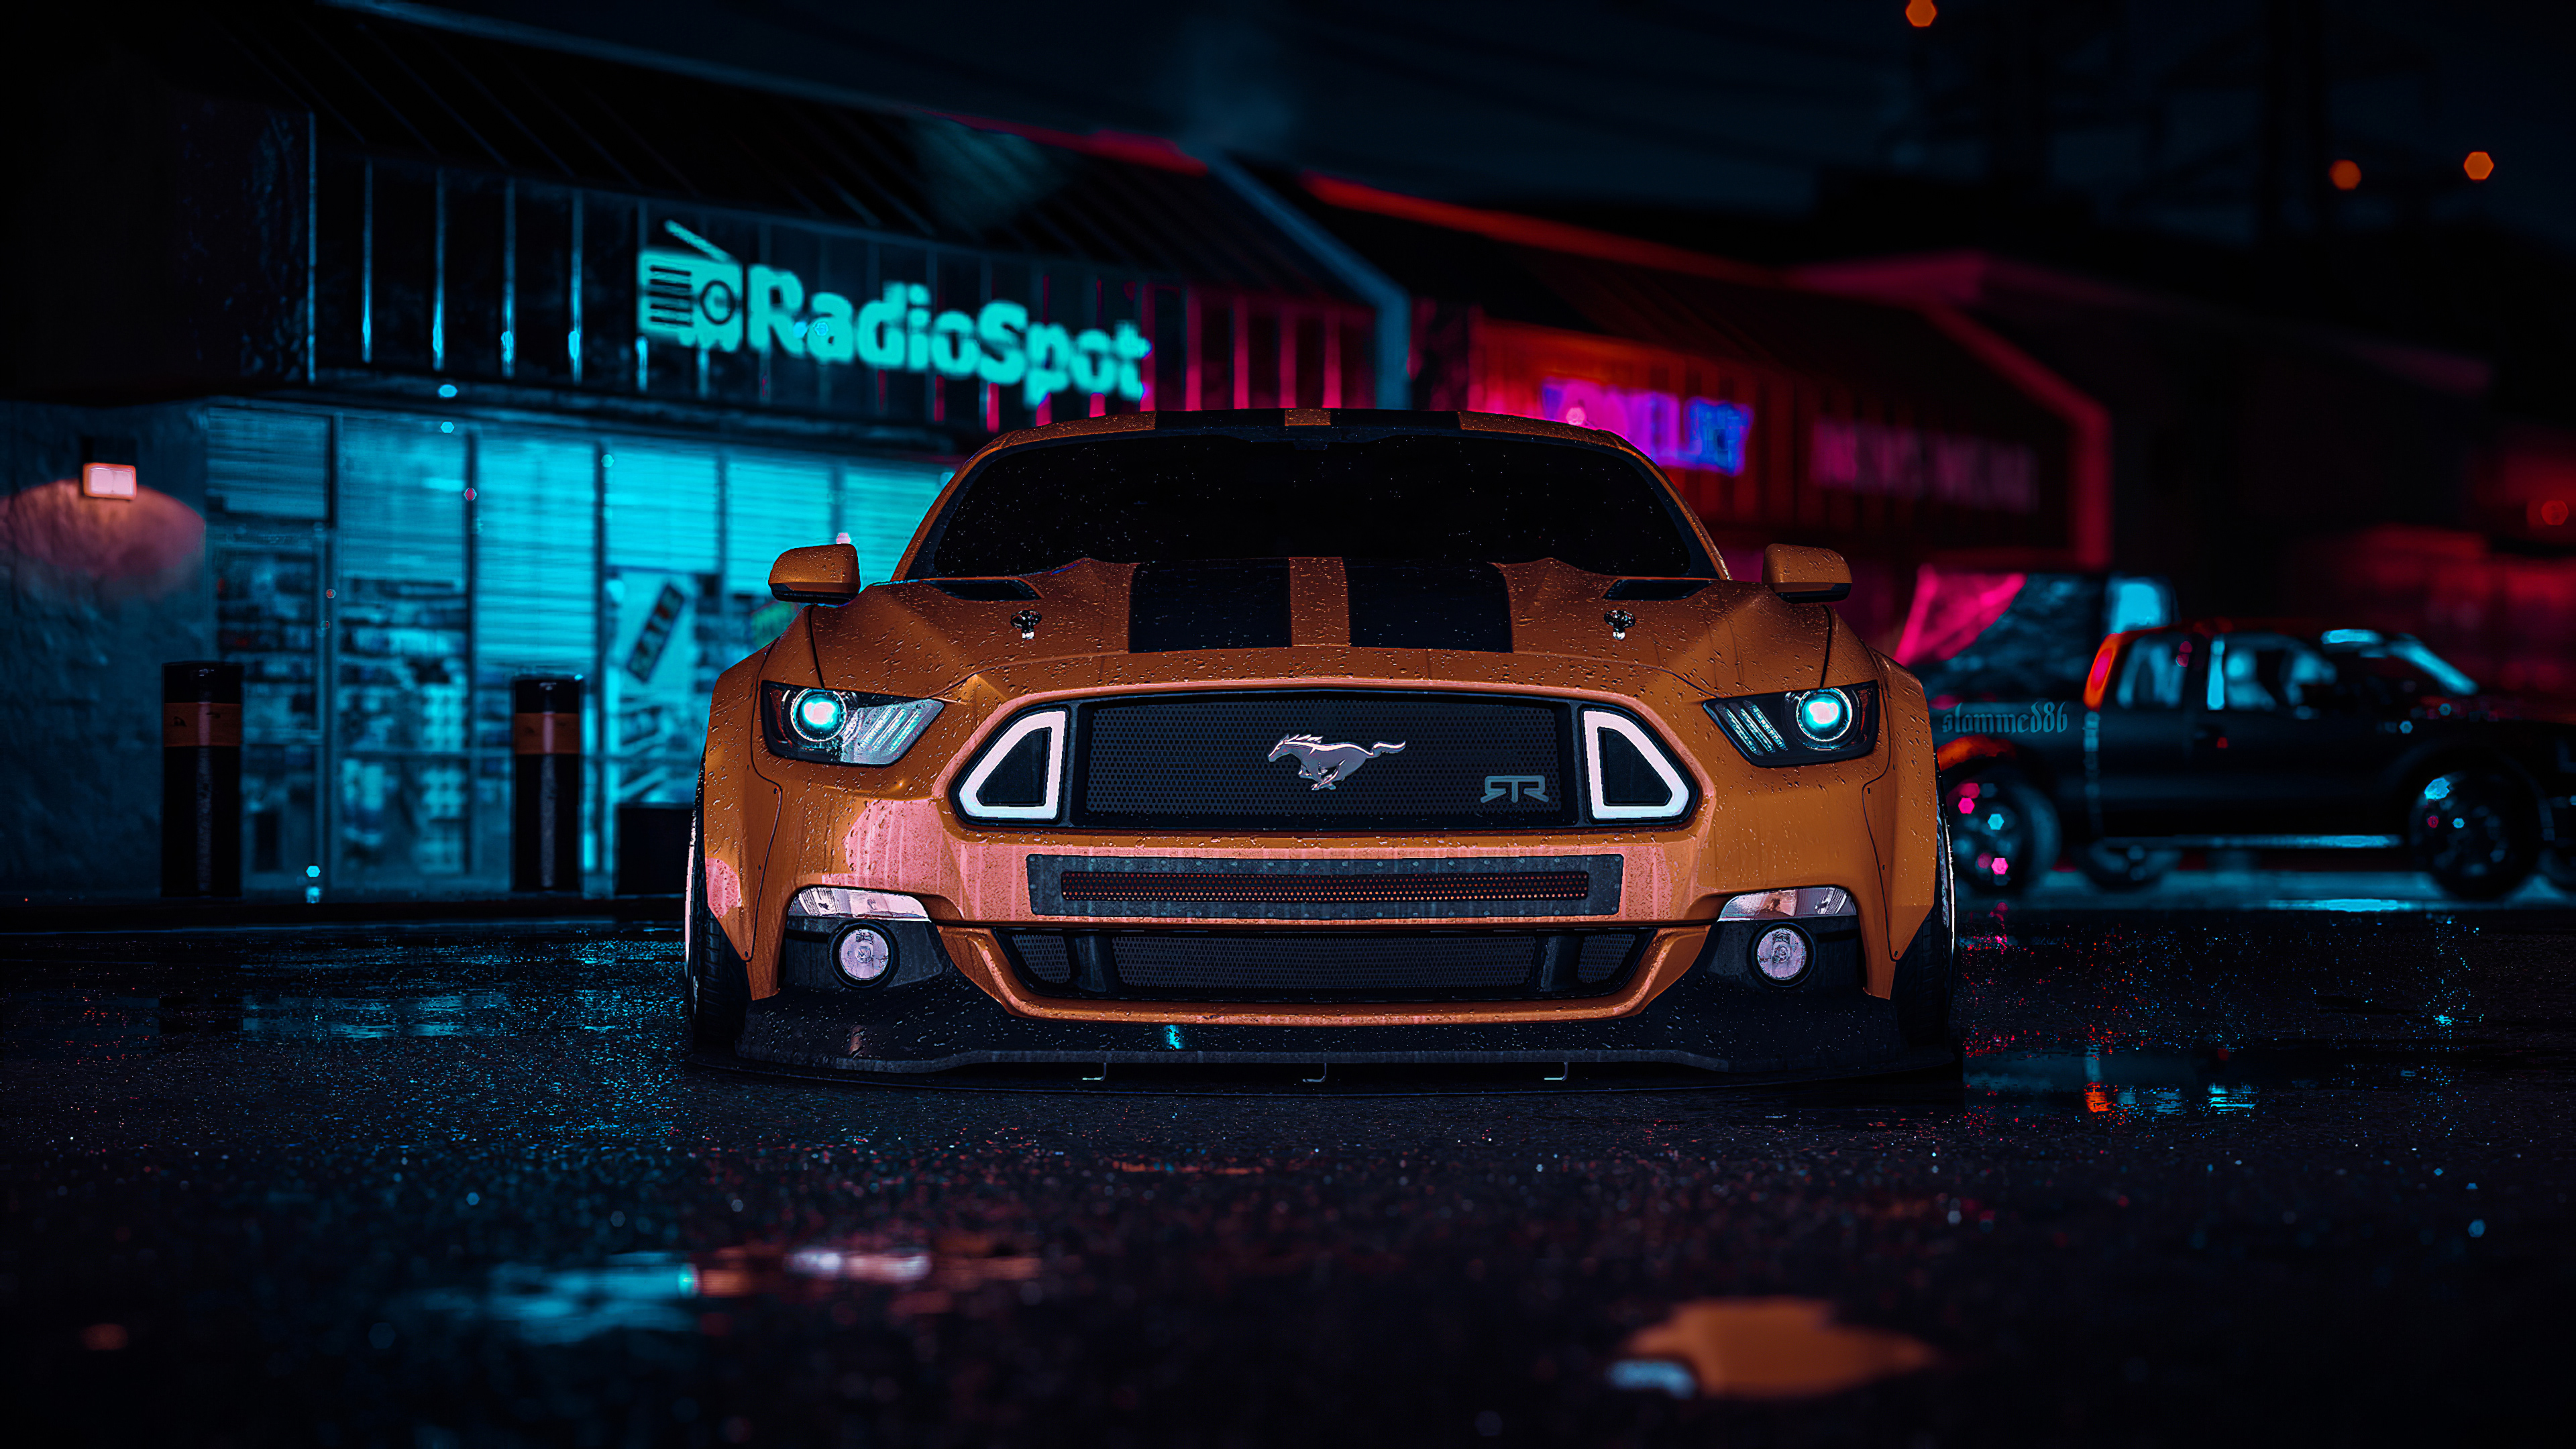 Wallpapers Need for Speed Ford Mustang cars on the desktop